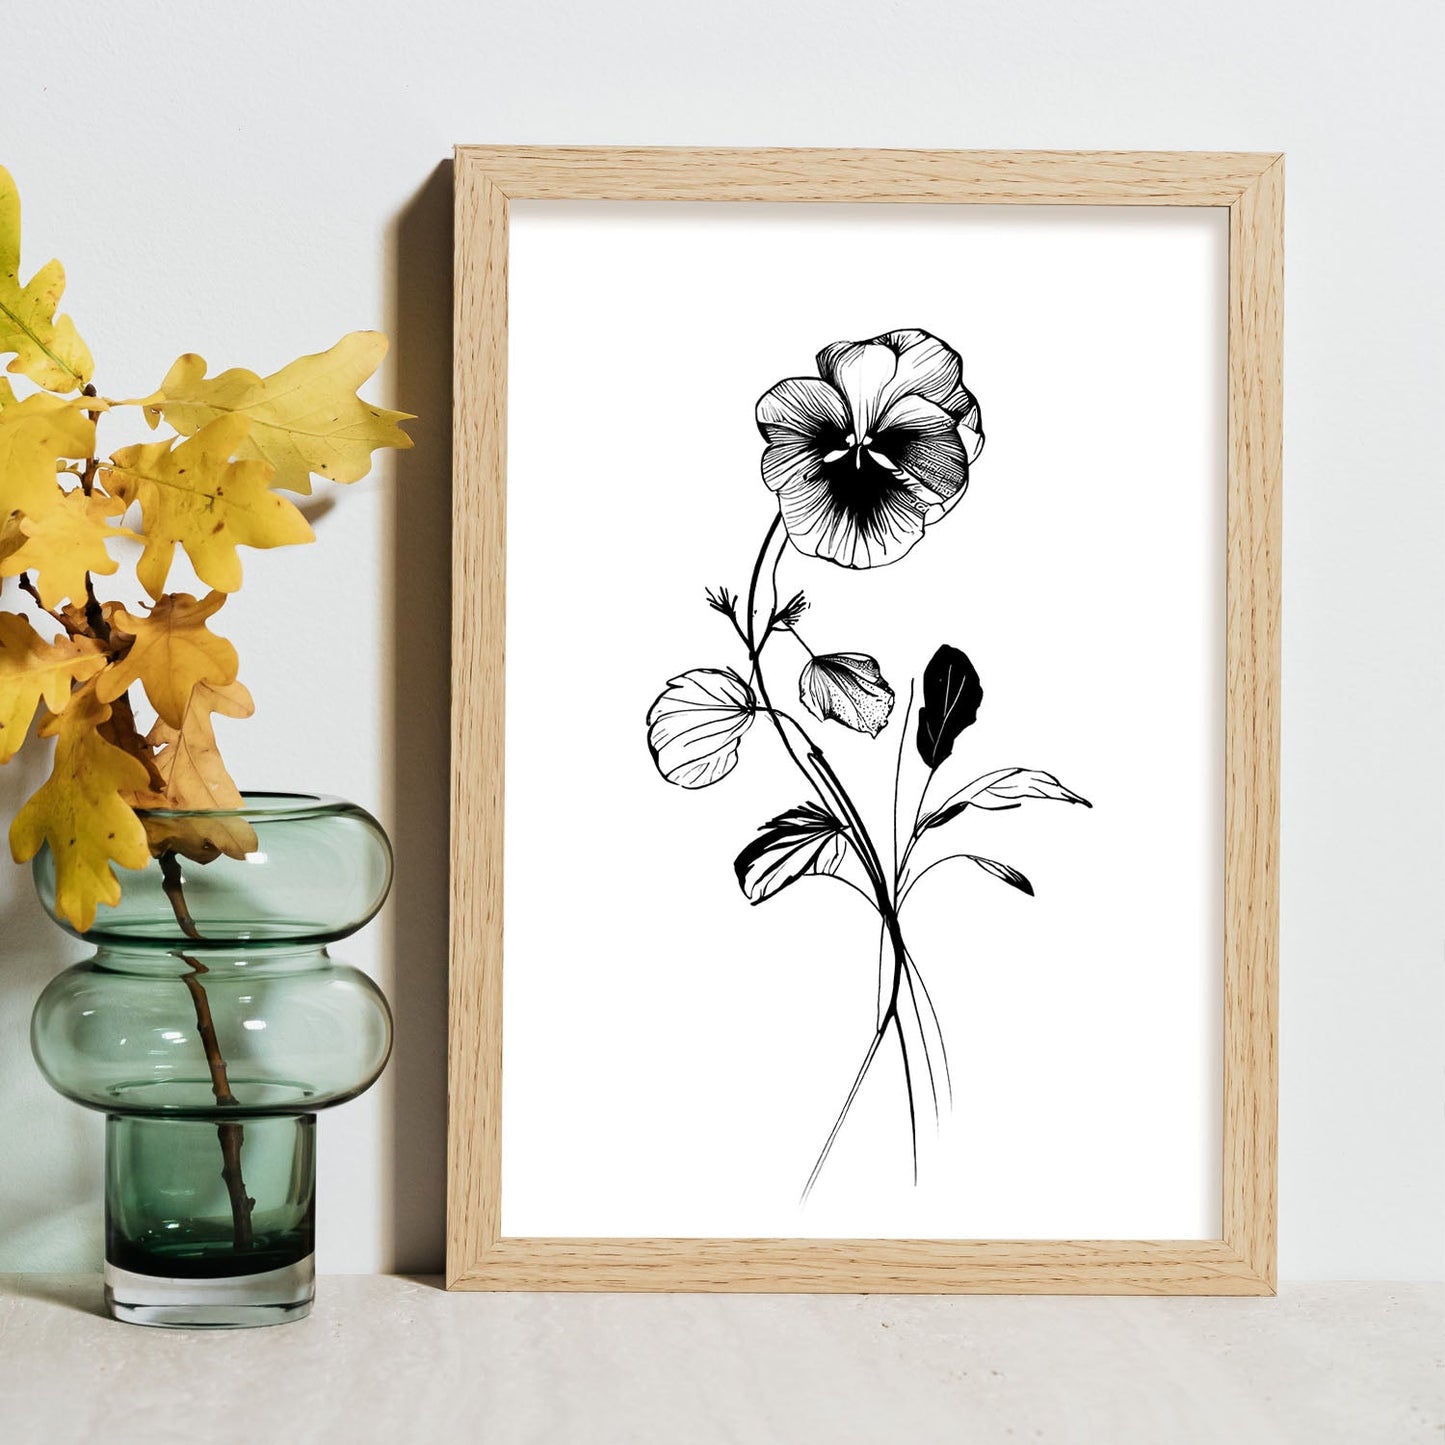 Nacnic Pansy Minimalist Line Art_2. Aesthetic Wall Art Prints for Bedroom or Living Room Design.